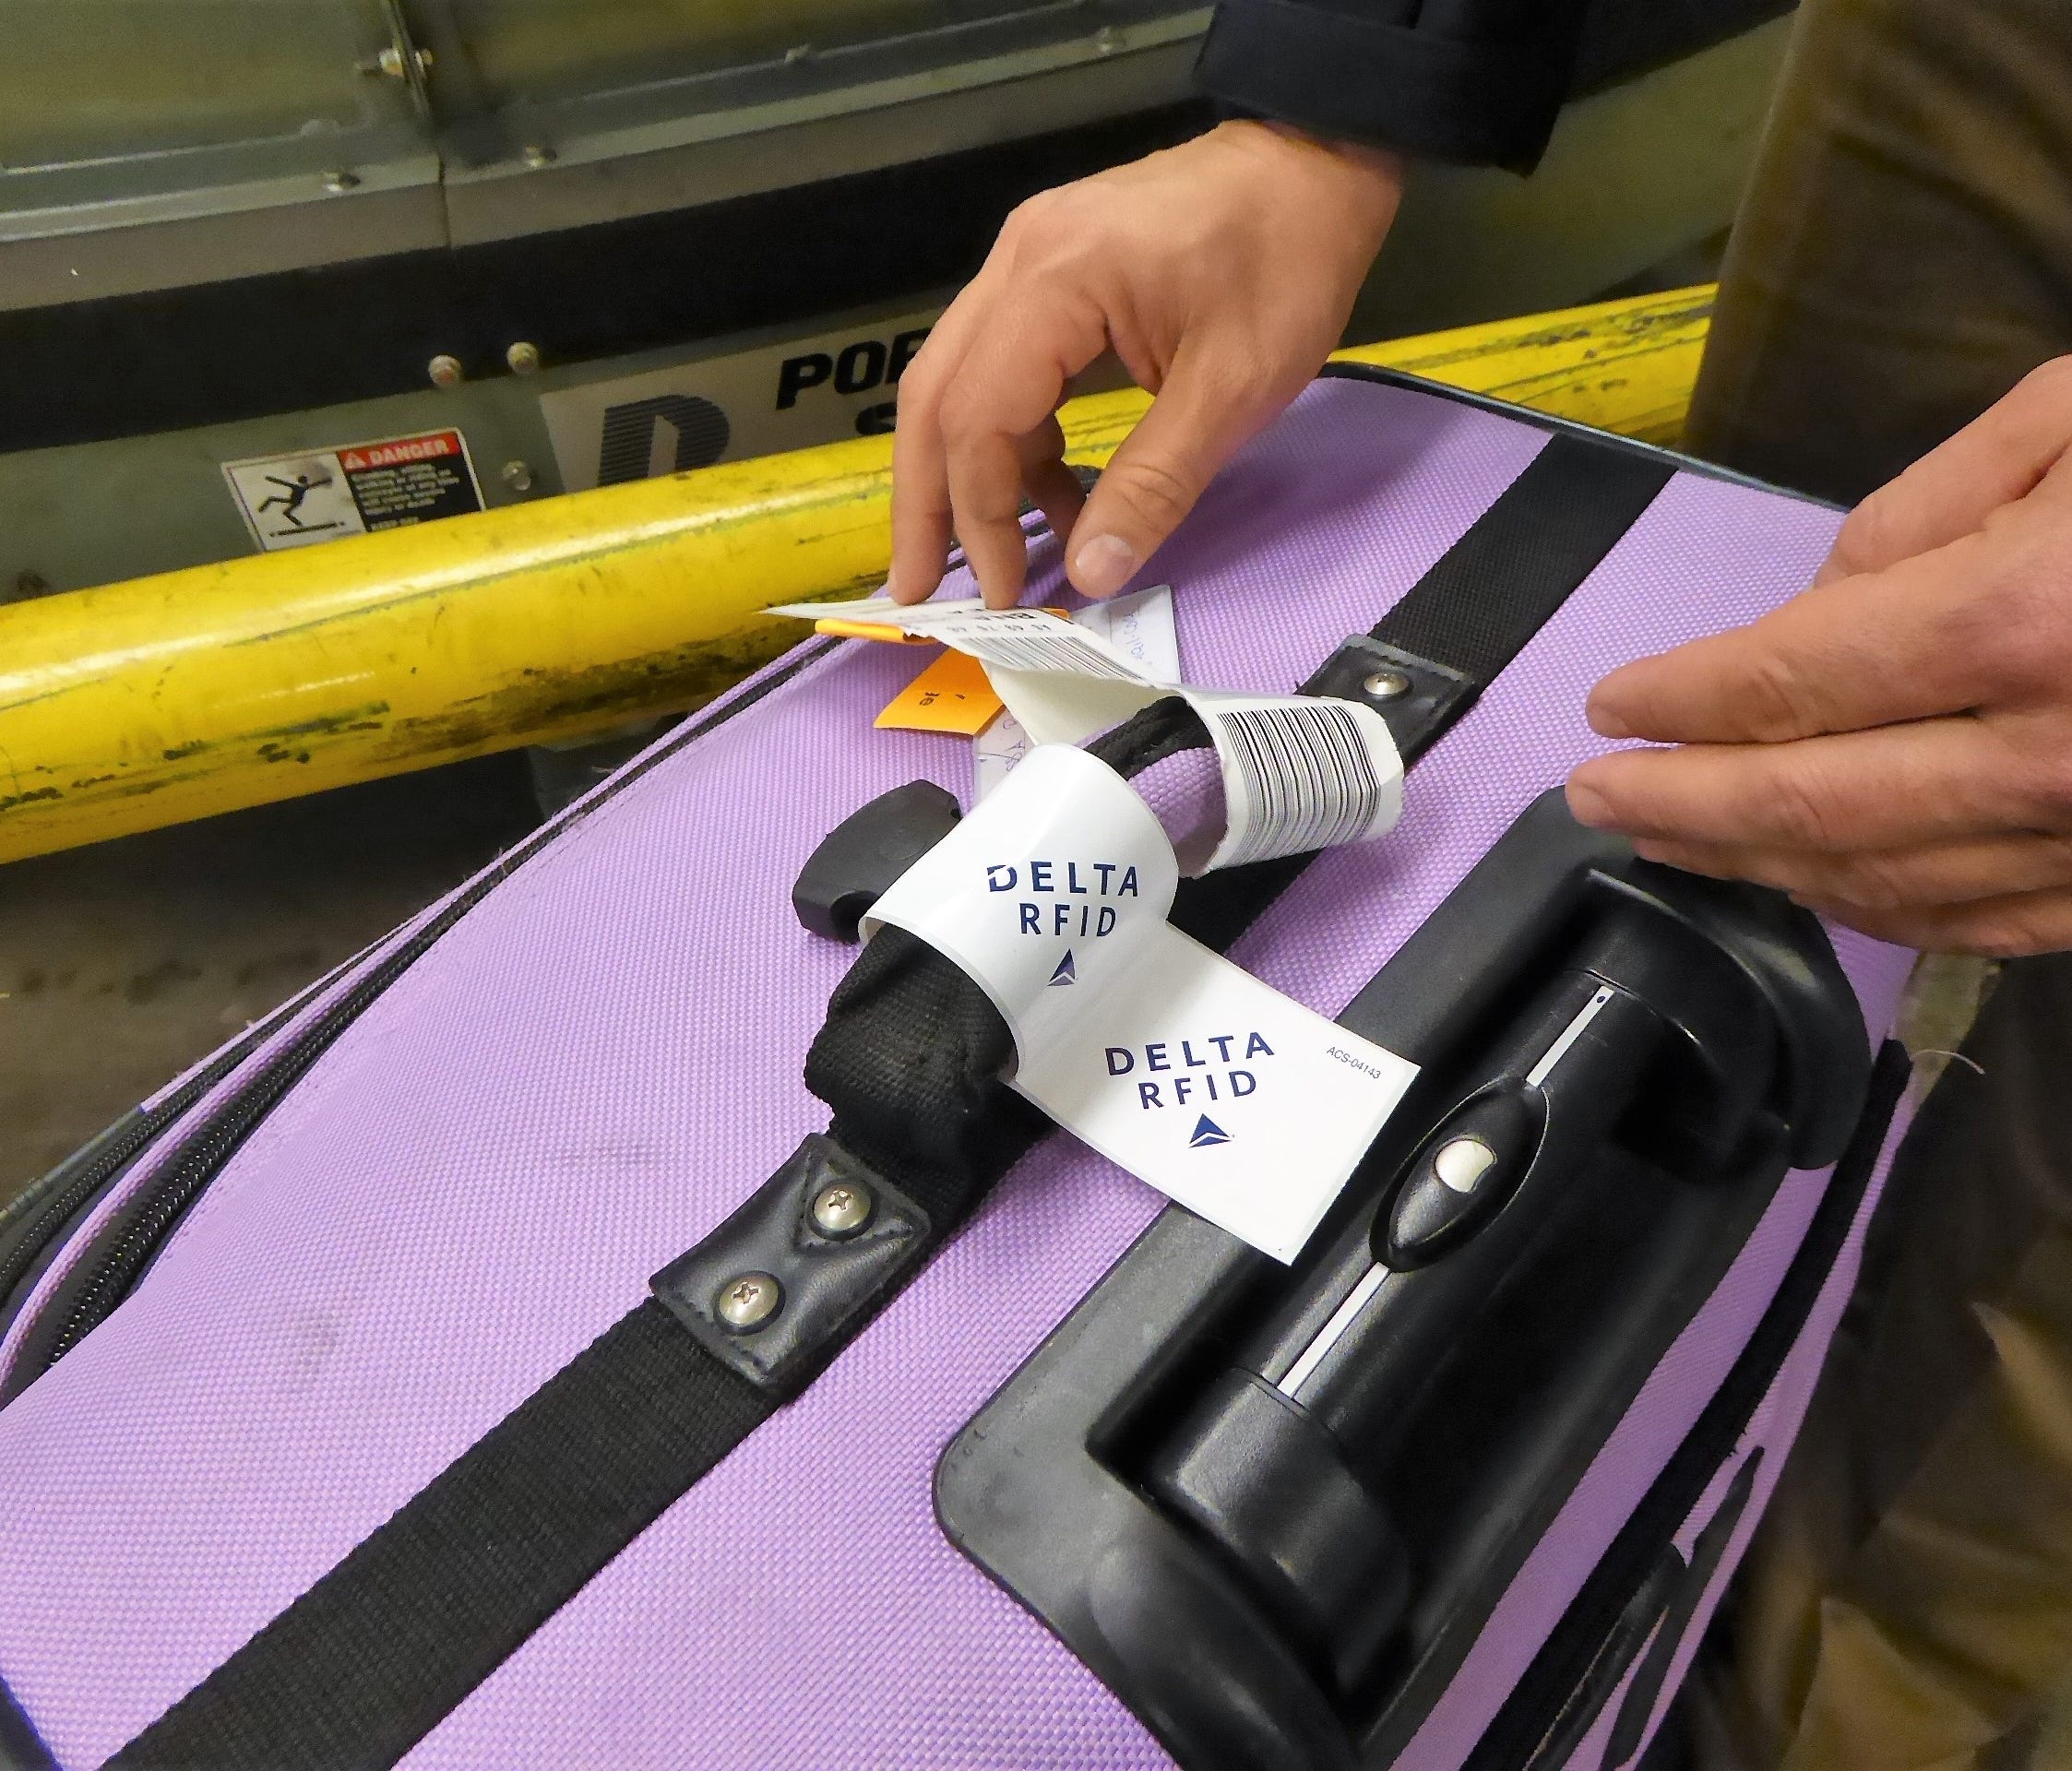 Delta and some other airlines add or embed an RFID tag in addition to the traditional 10-digit luggage label.